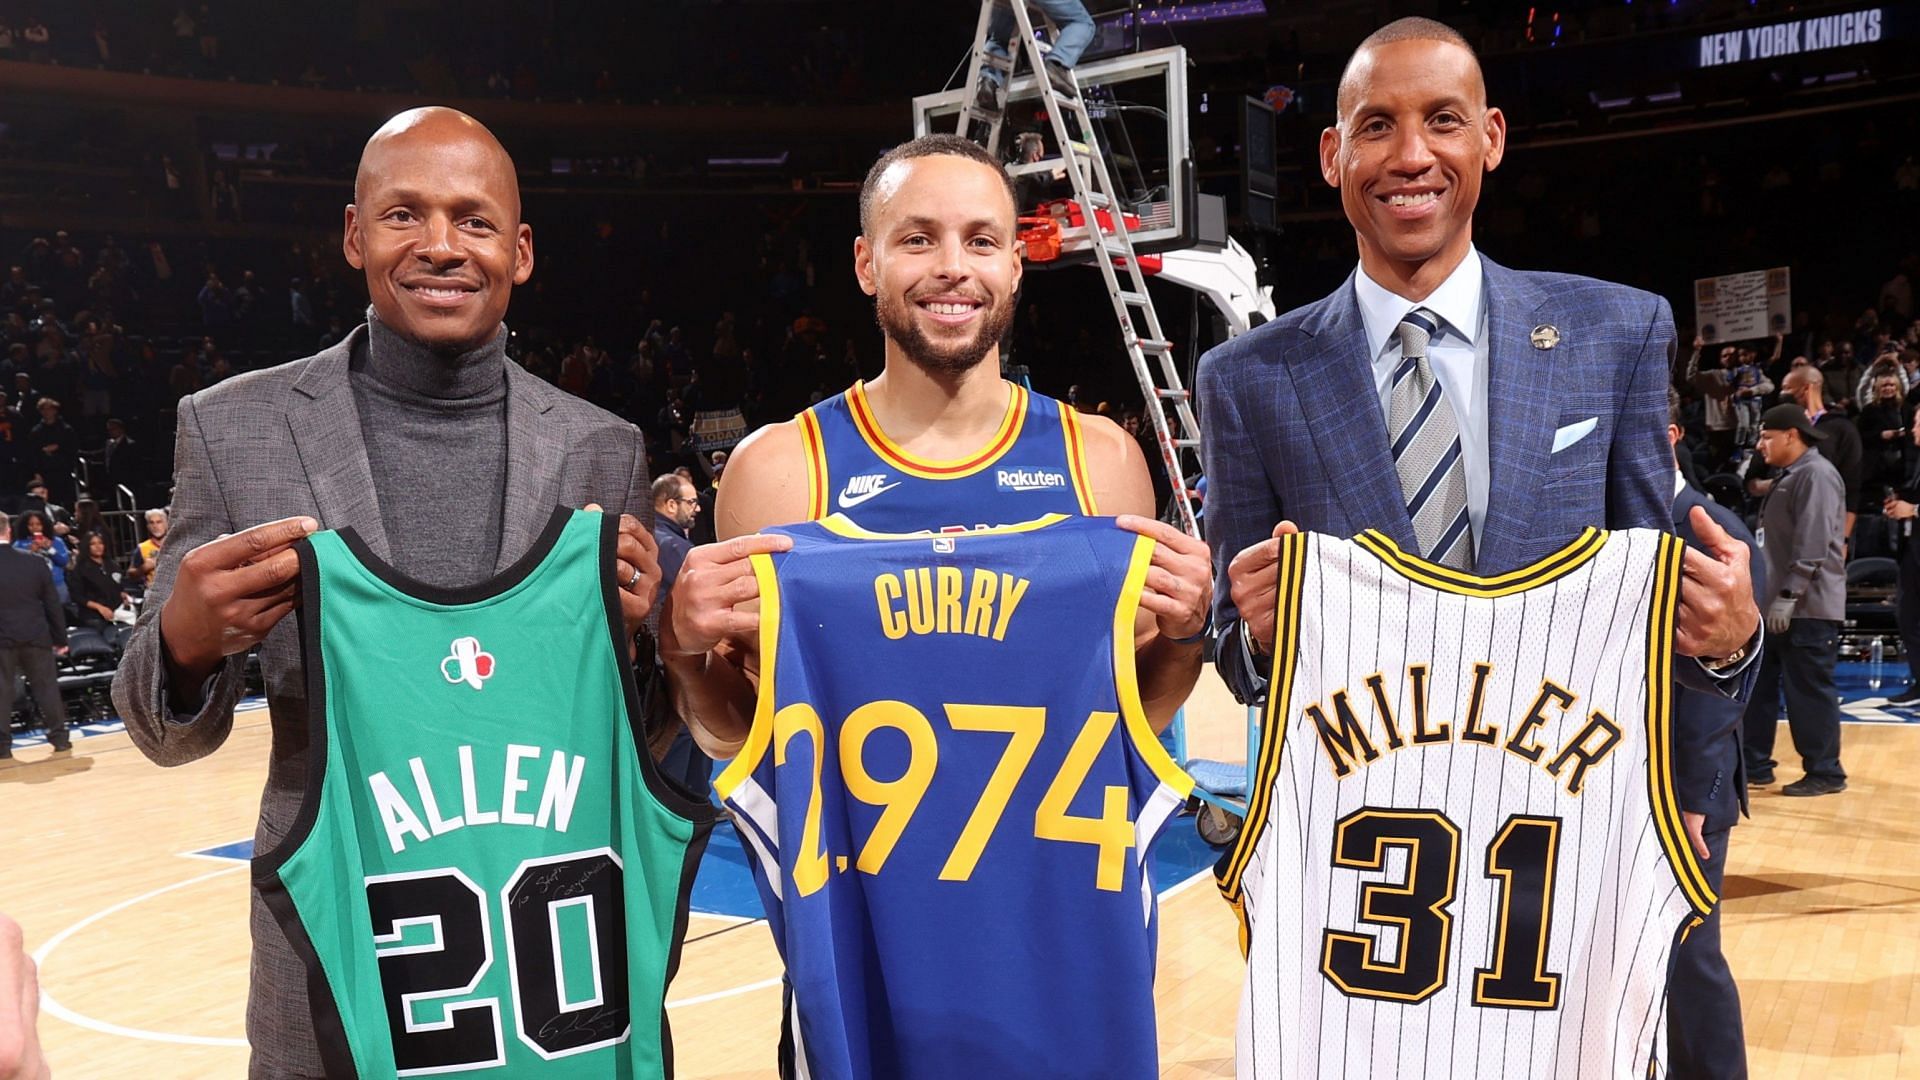 Ray Allen, Steph Curry, and Reggie Miller